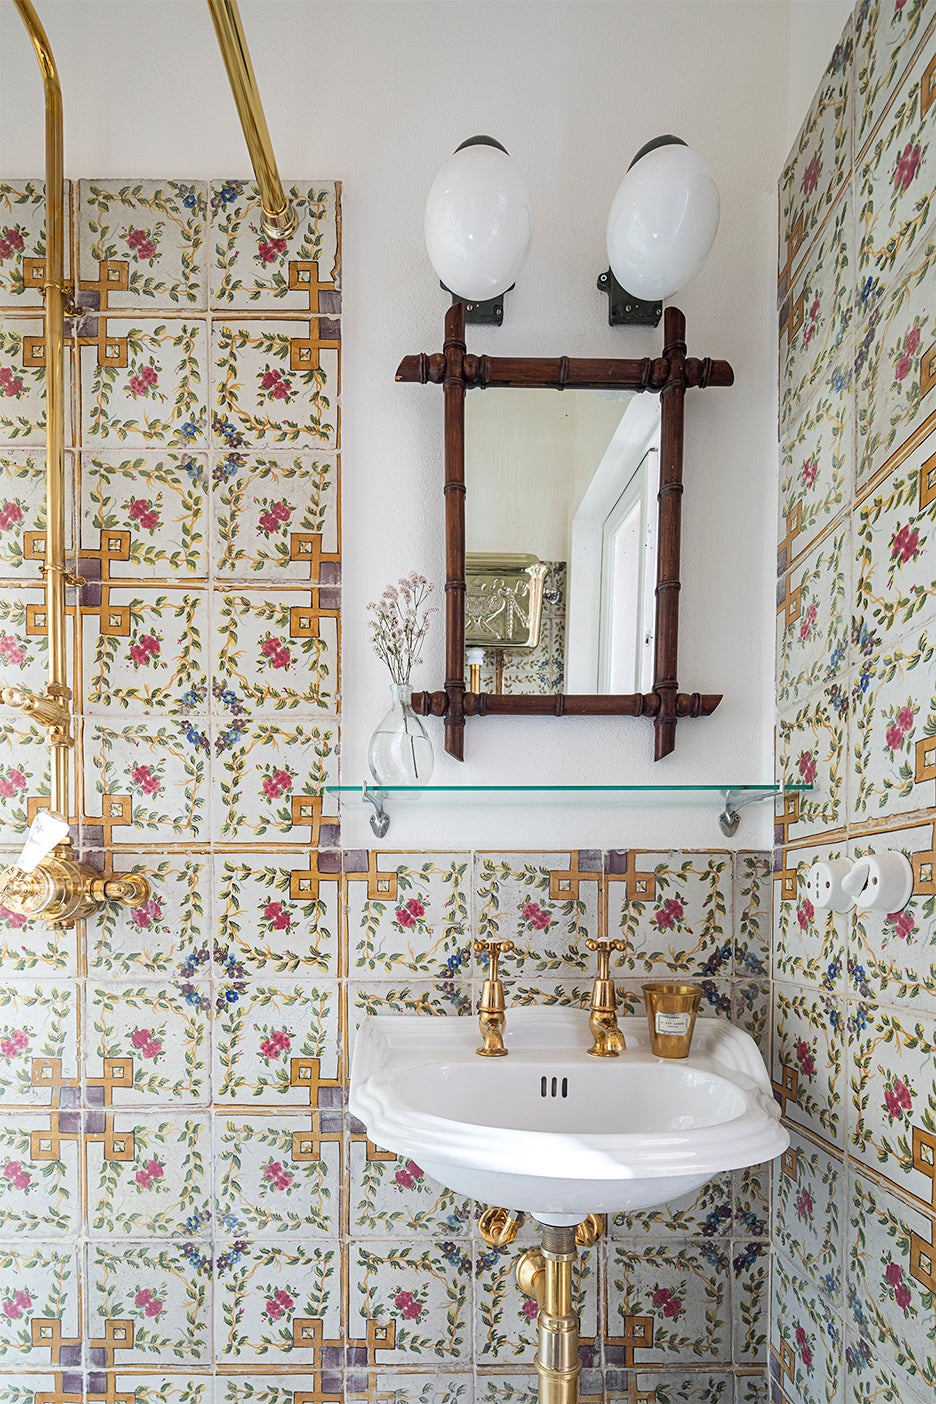 Bathroom with floral tiles